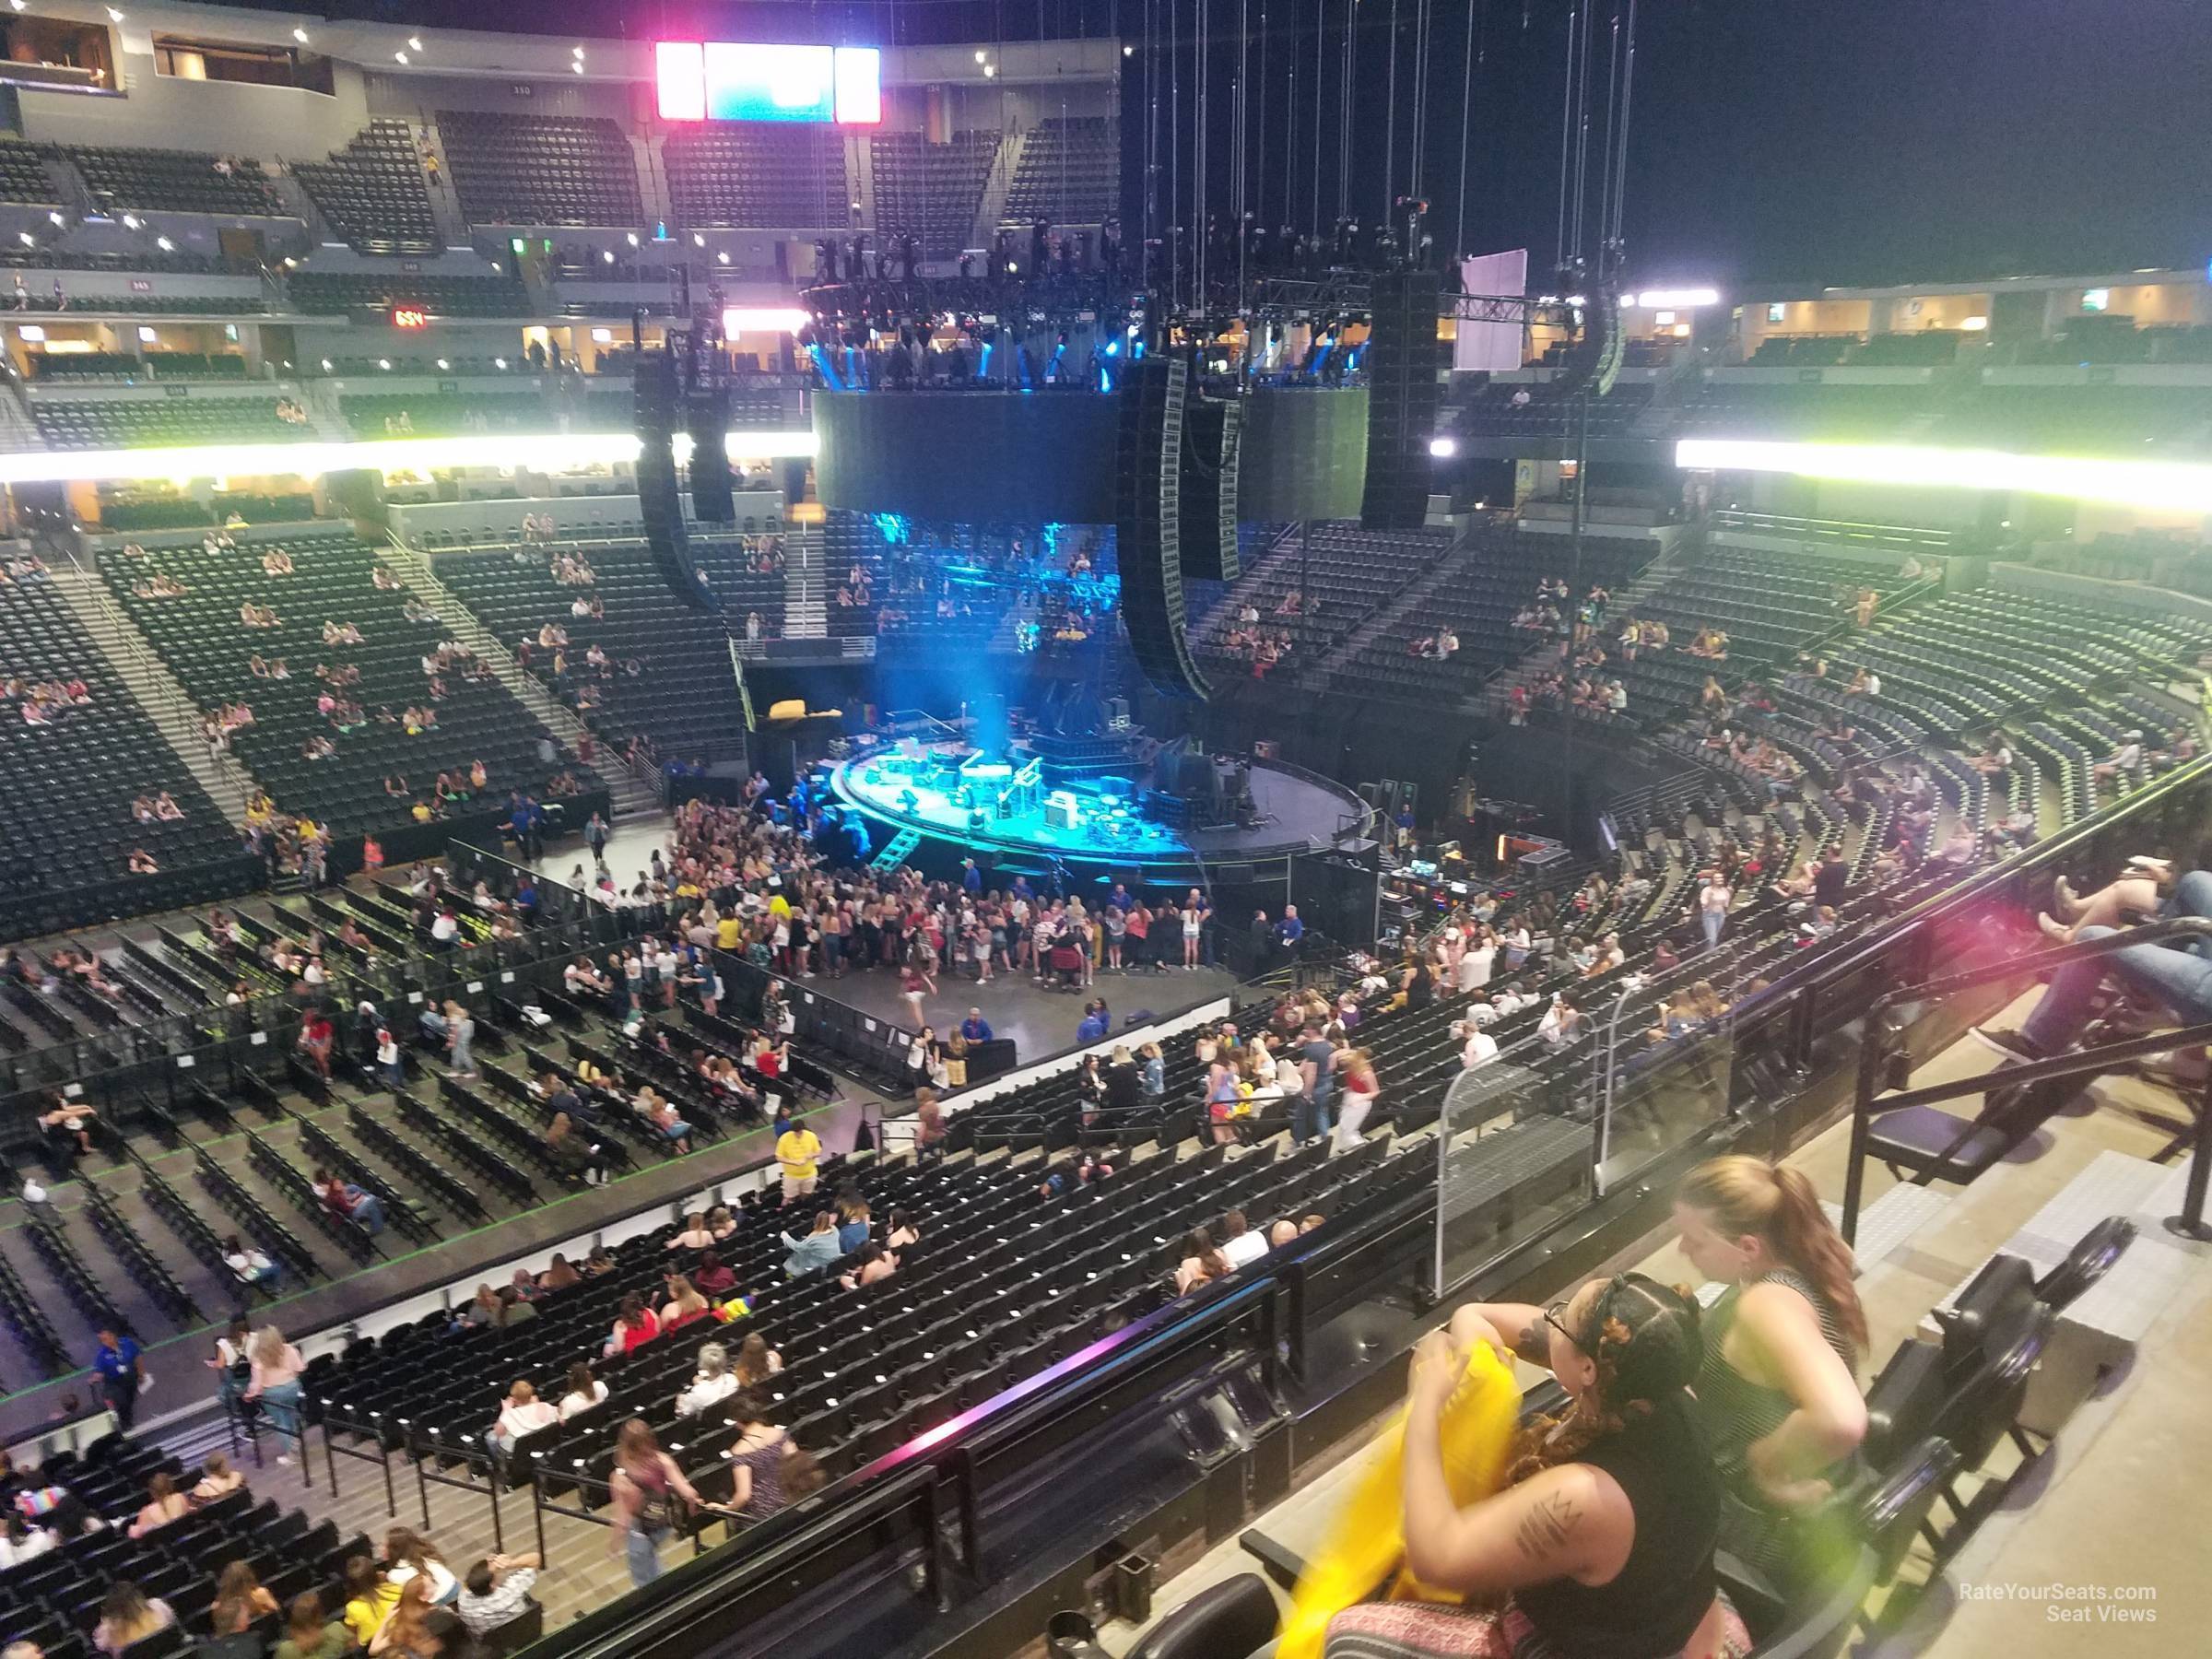 section 202, row 4 seat view  for concert - ball arena